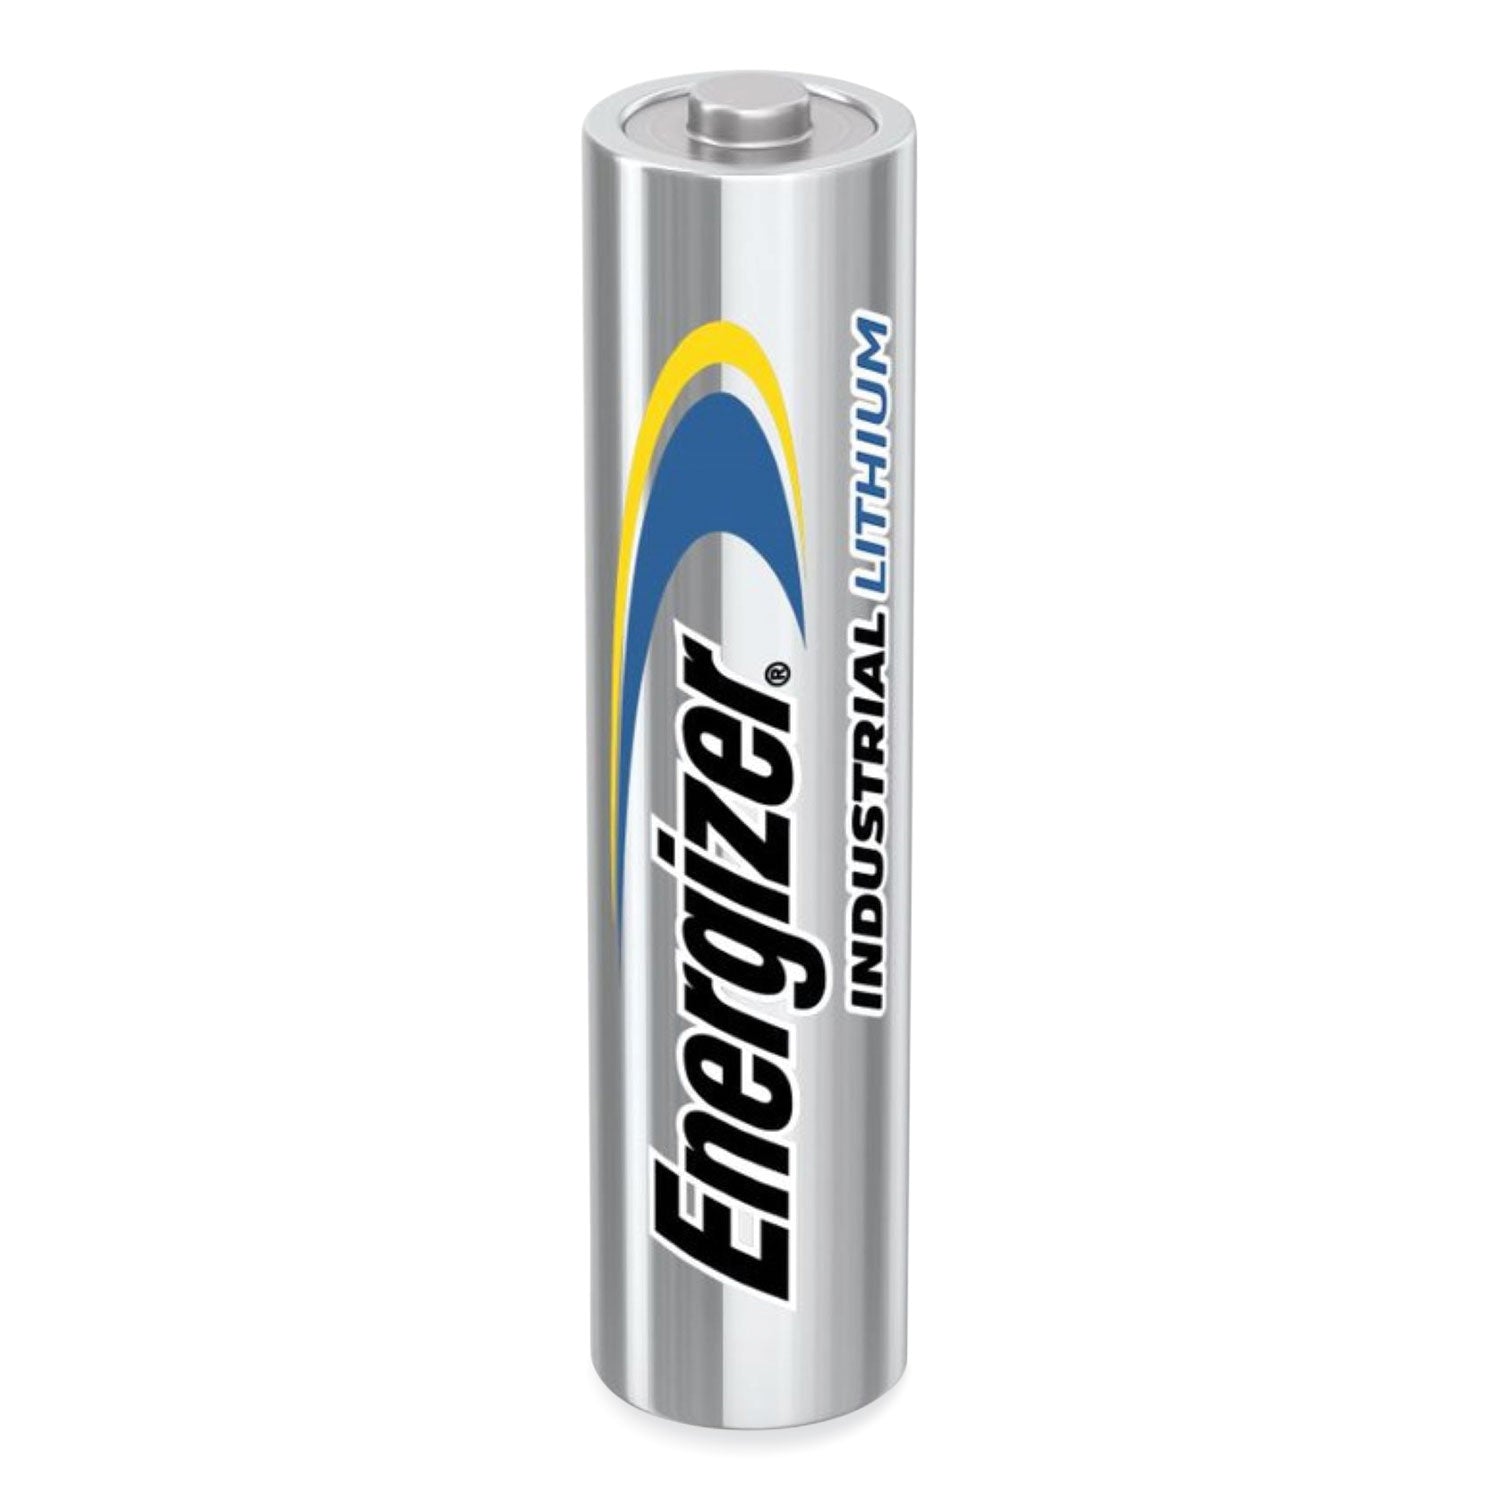 industrial-lithium-aaa-battery-15-v-4-pack_eveln92pk - 2